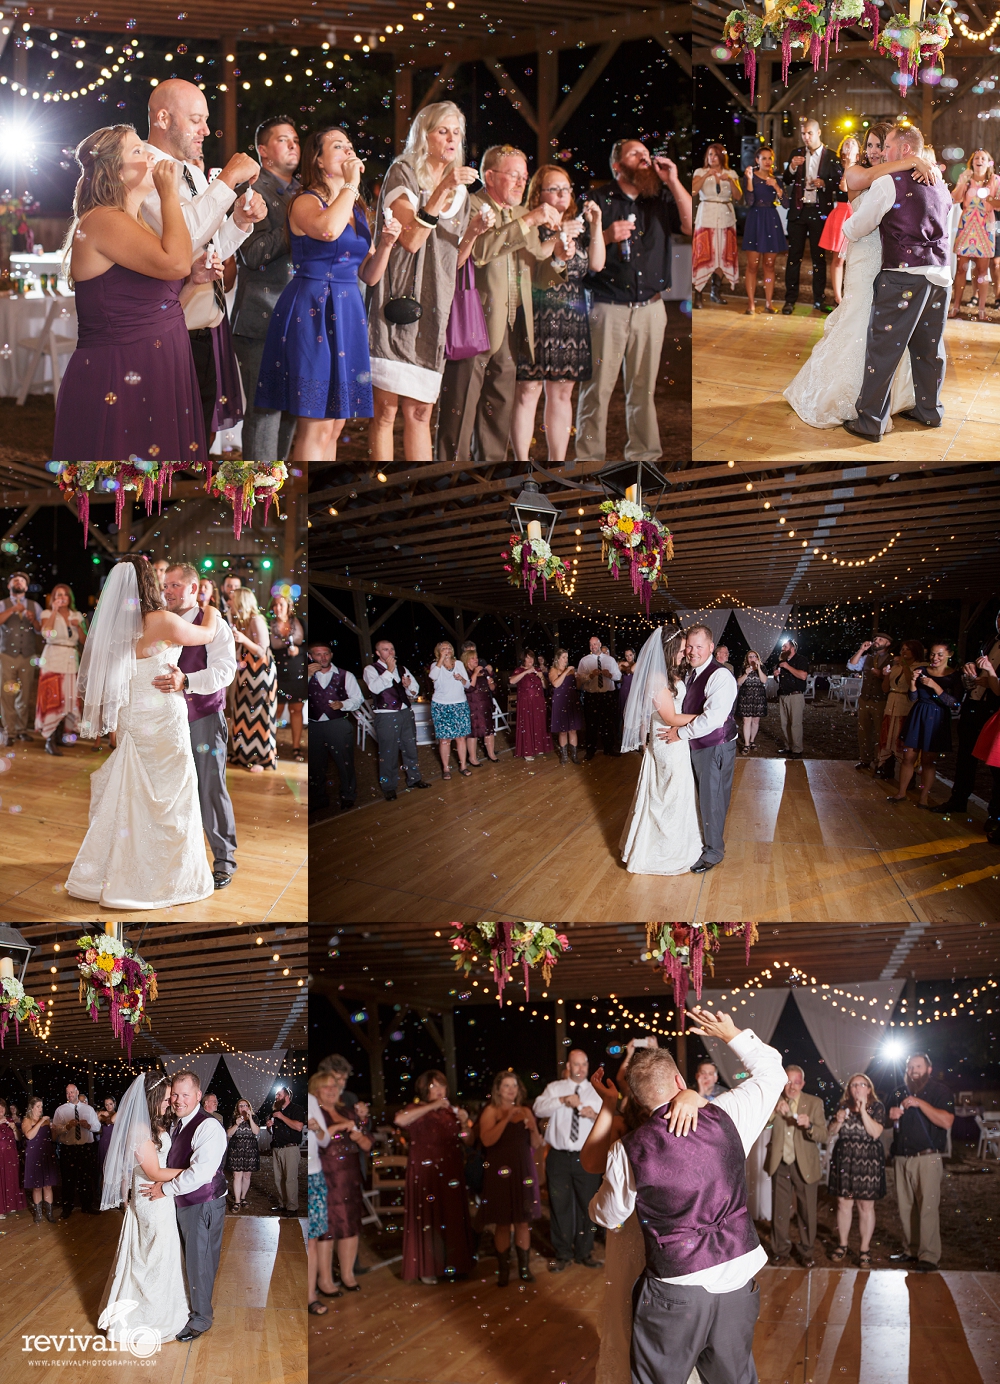 Katie + Kyle: A Rustic Fall Wedding at Leatherwood Mountain Resort by Revival Photography NC Wedding Photographers www.revivalphotography.com